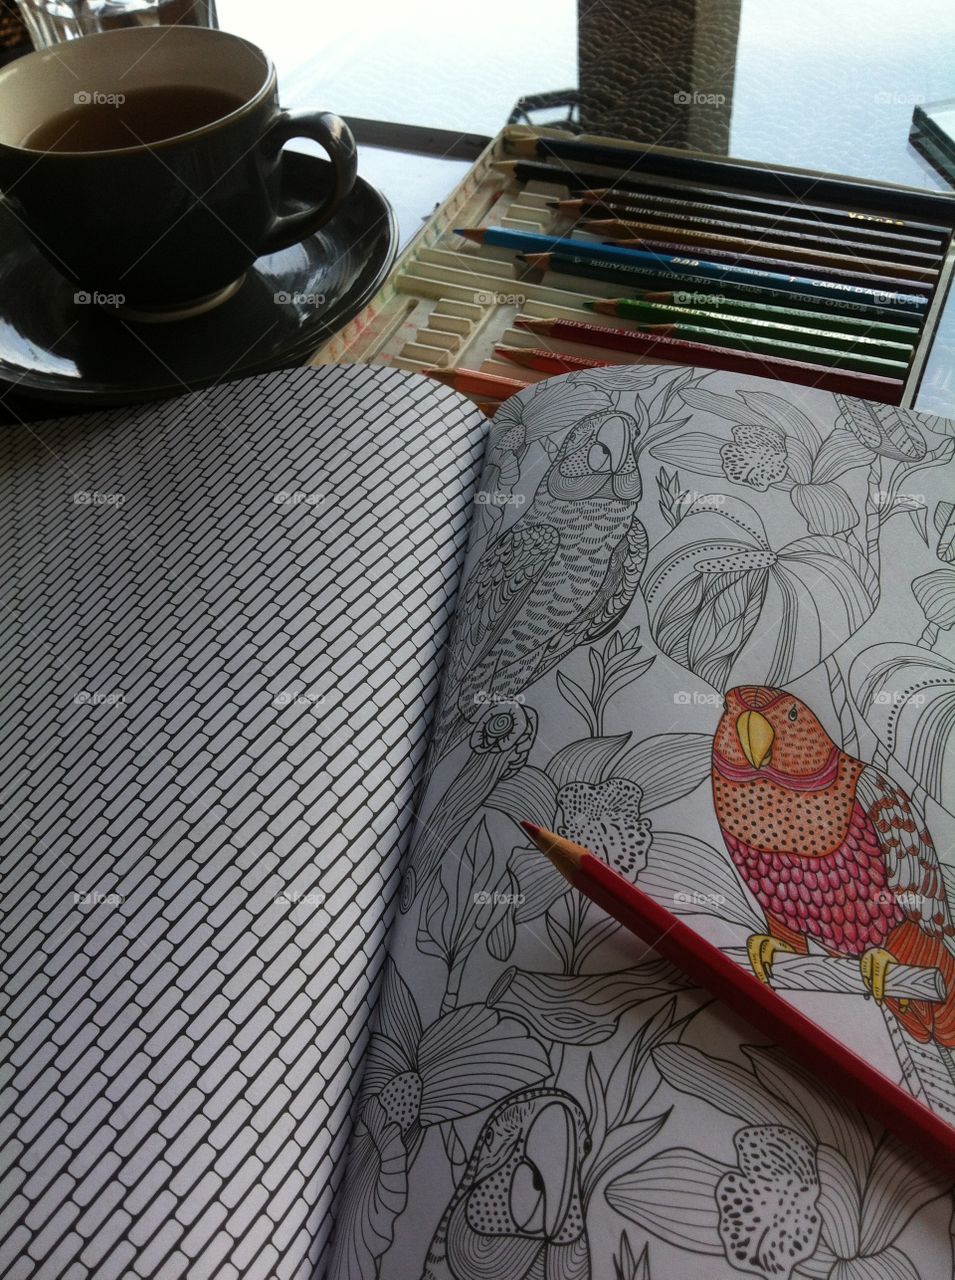 Colouring with a cup of tea